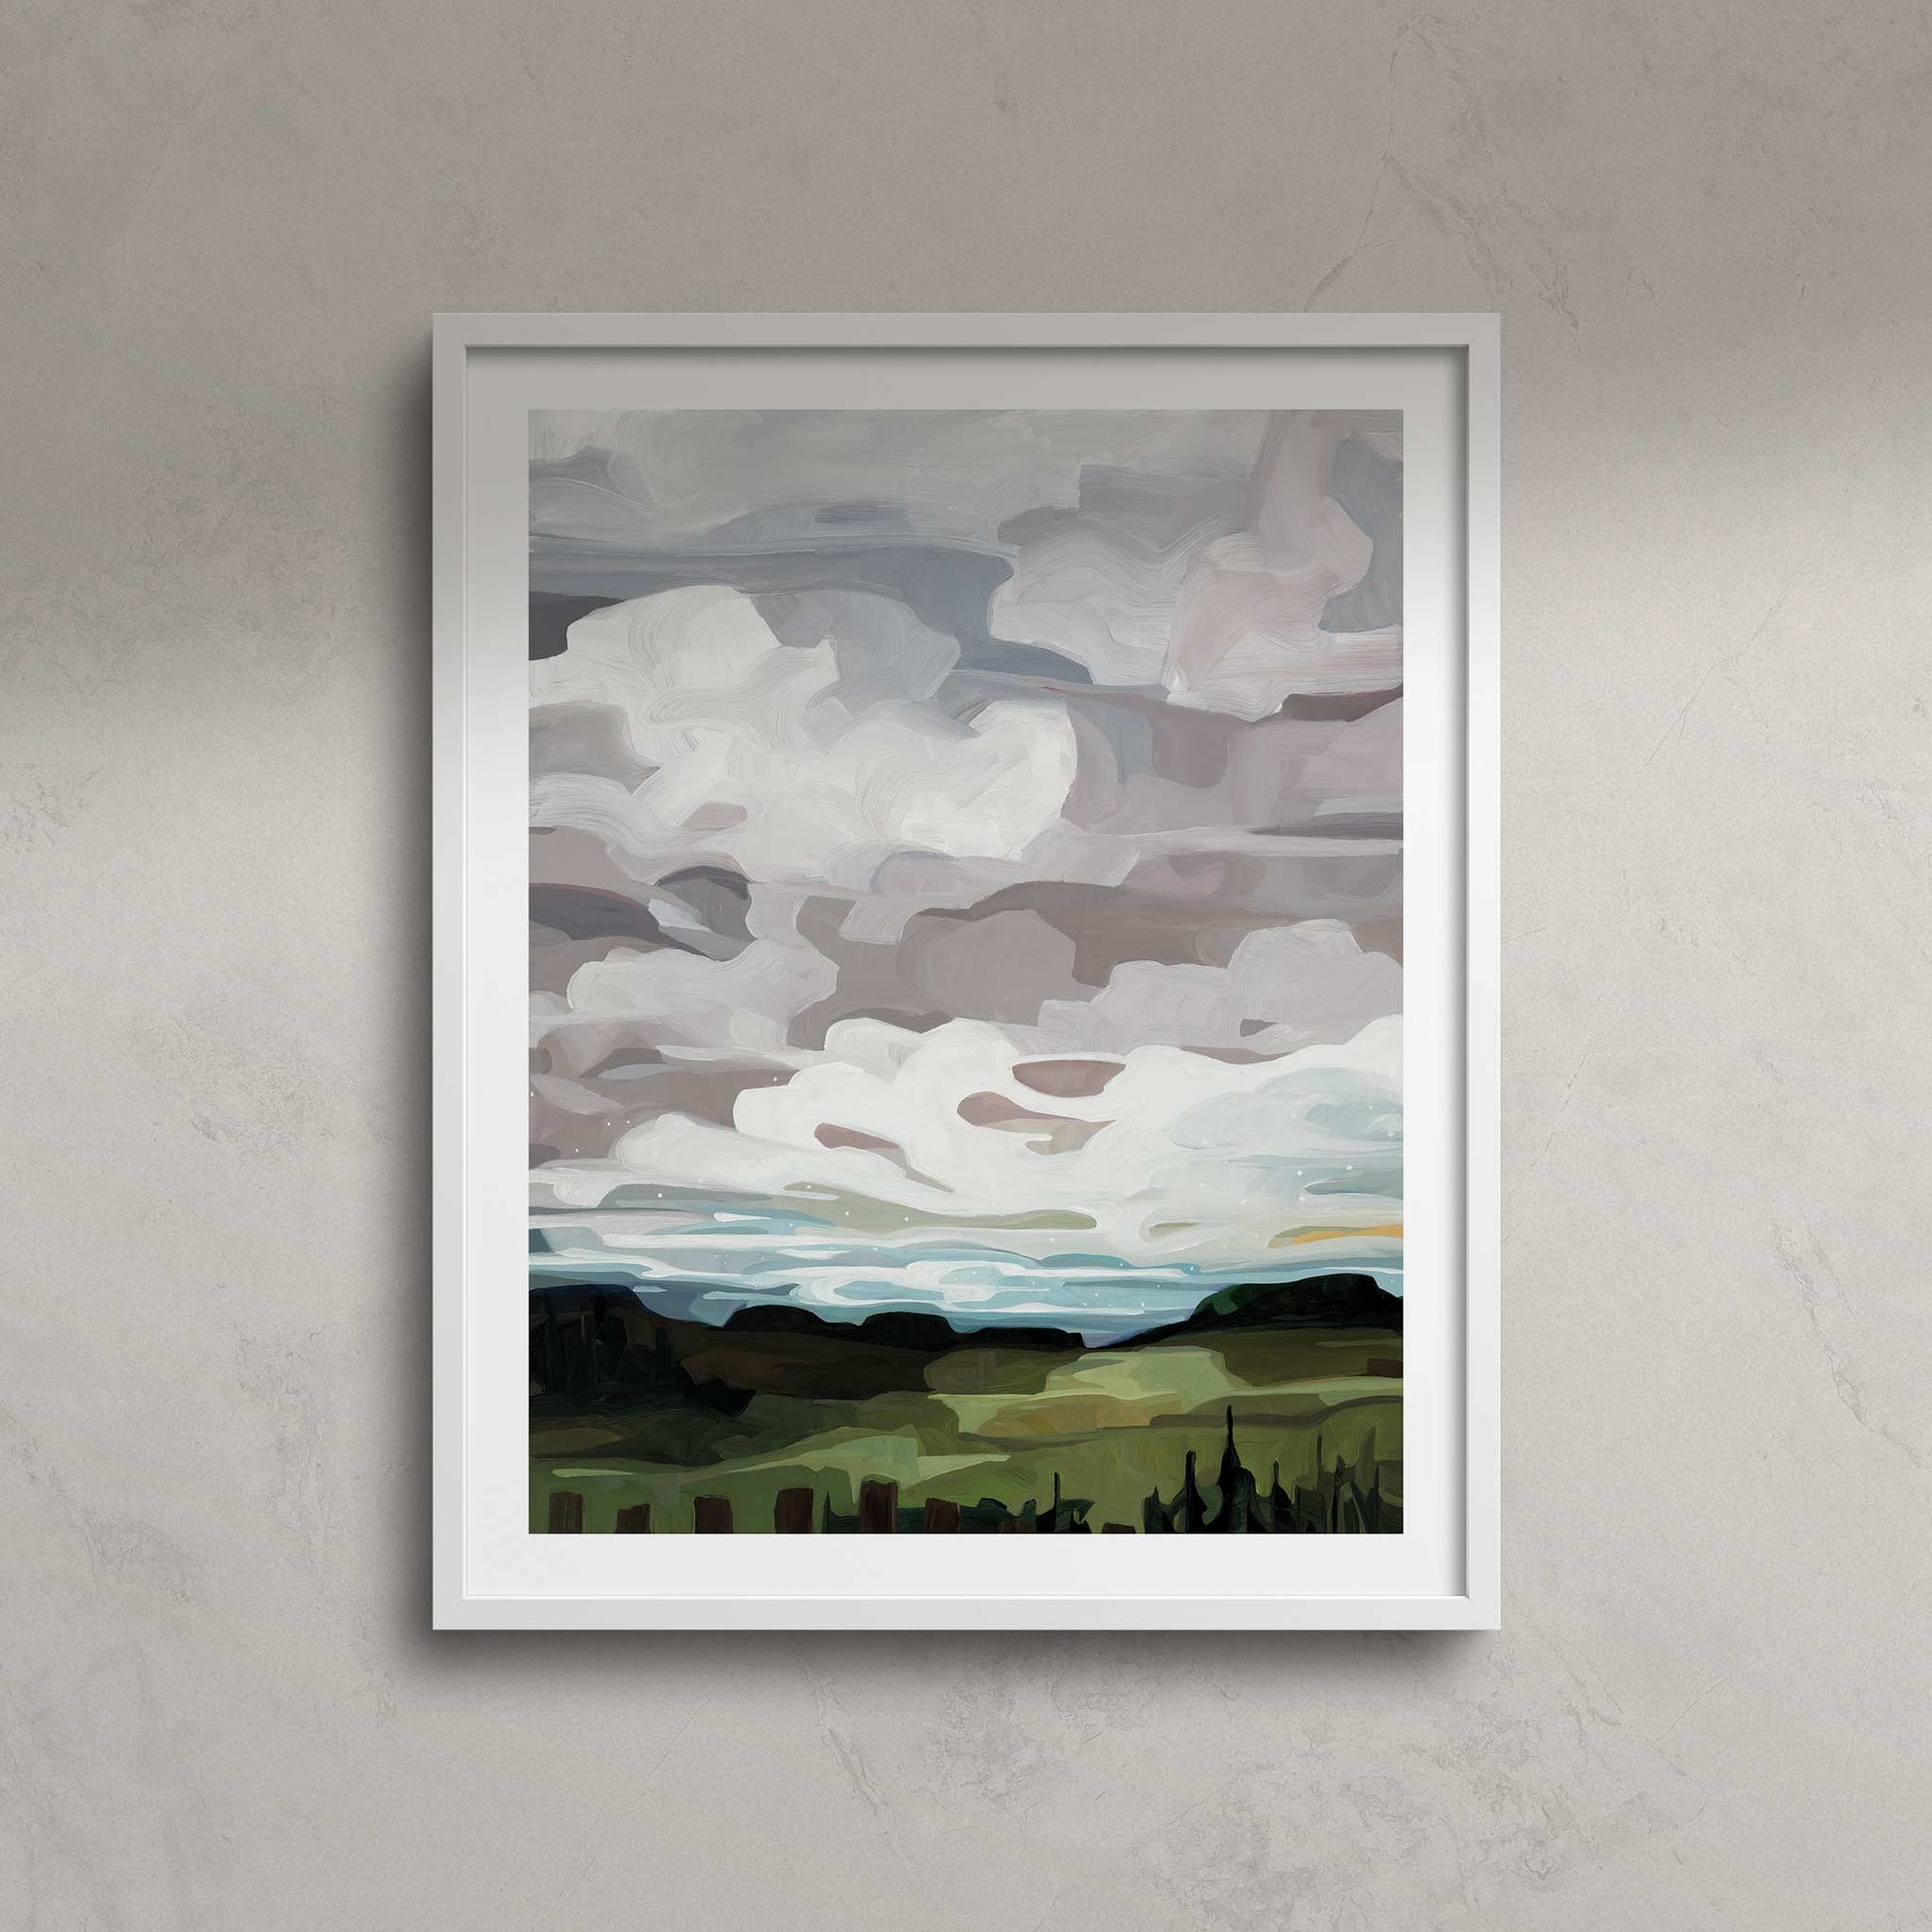 An framed vertical art print of an abstract landscape created from a warm grey painting with a muted palette of soft greys and greens with white billowy clouds light blue sky